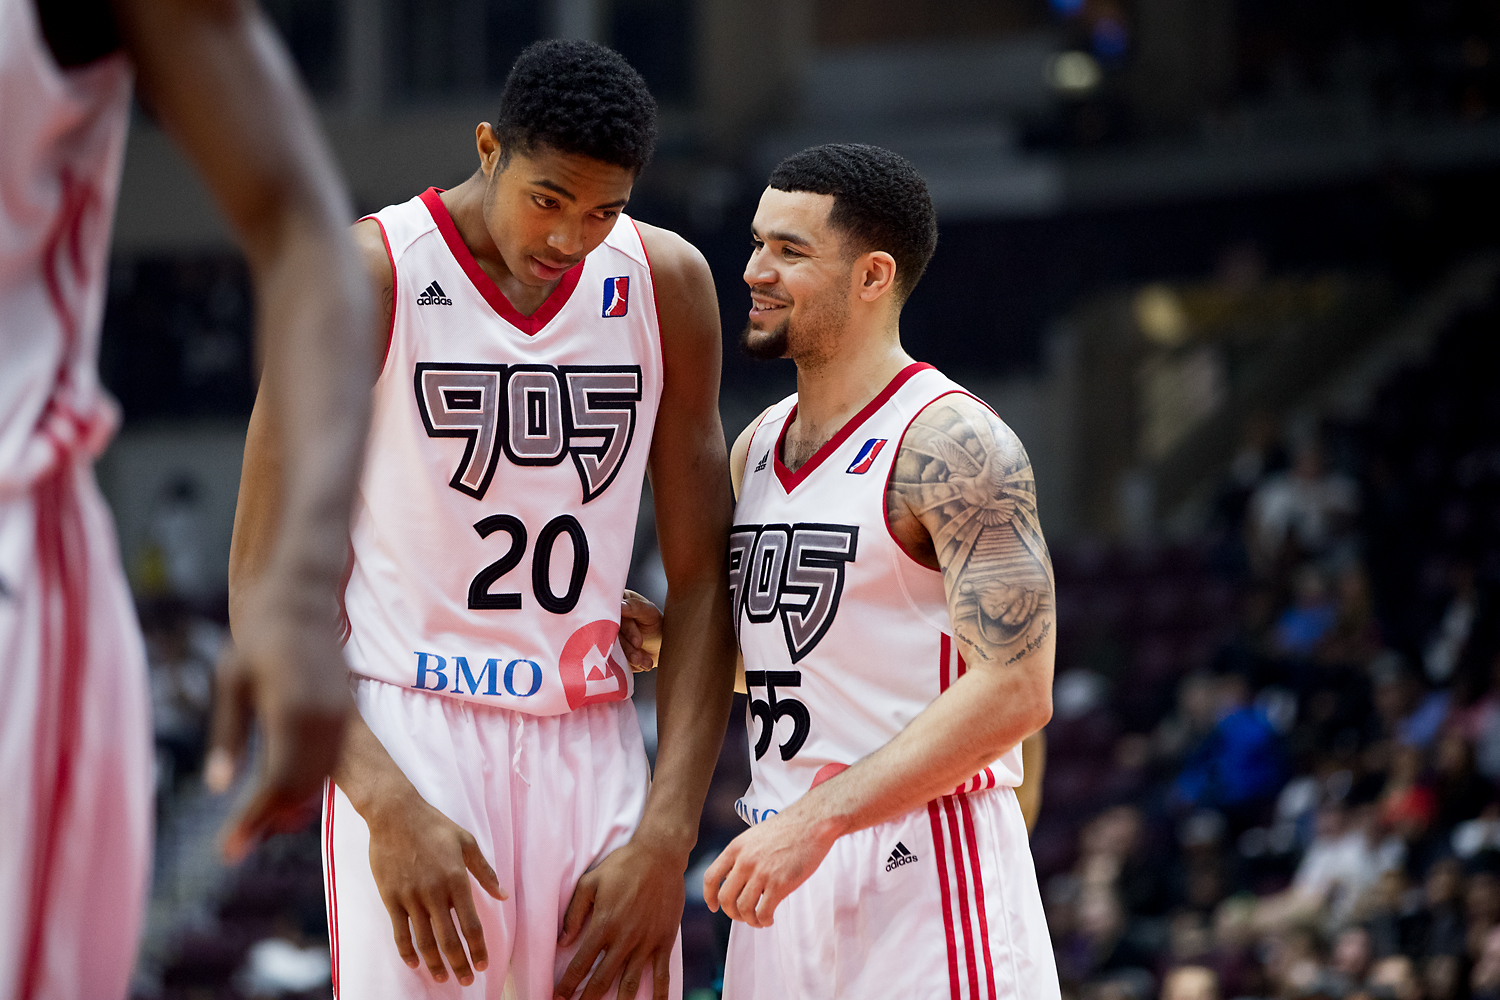 Dial 905: Toronto Raptors 905 deliver their worst and best defensive  performances of the season - Raptors HQ